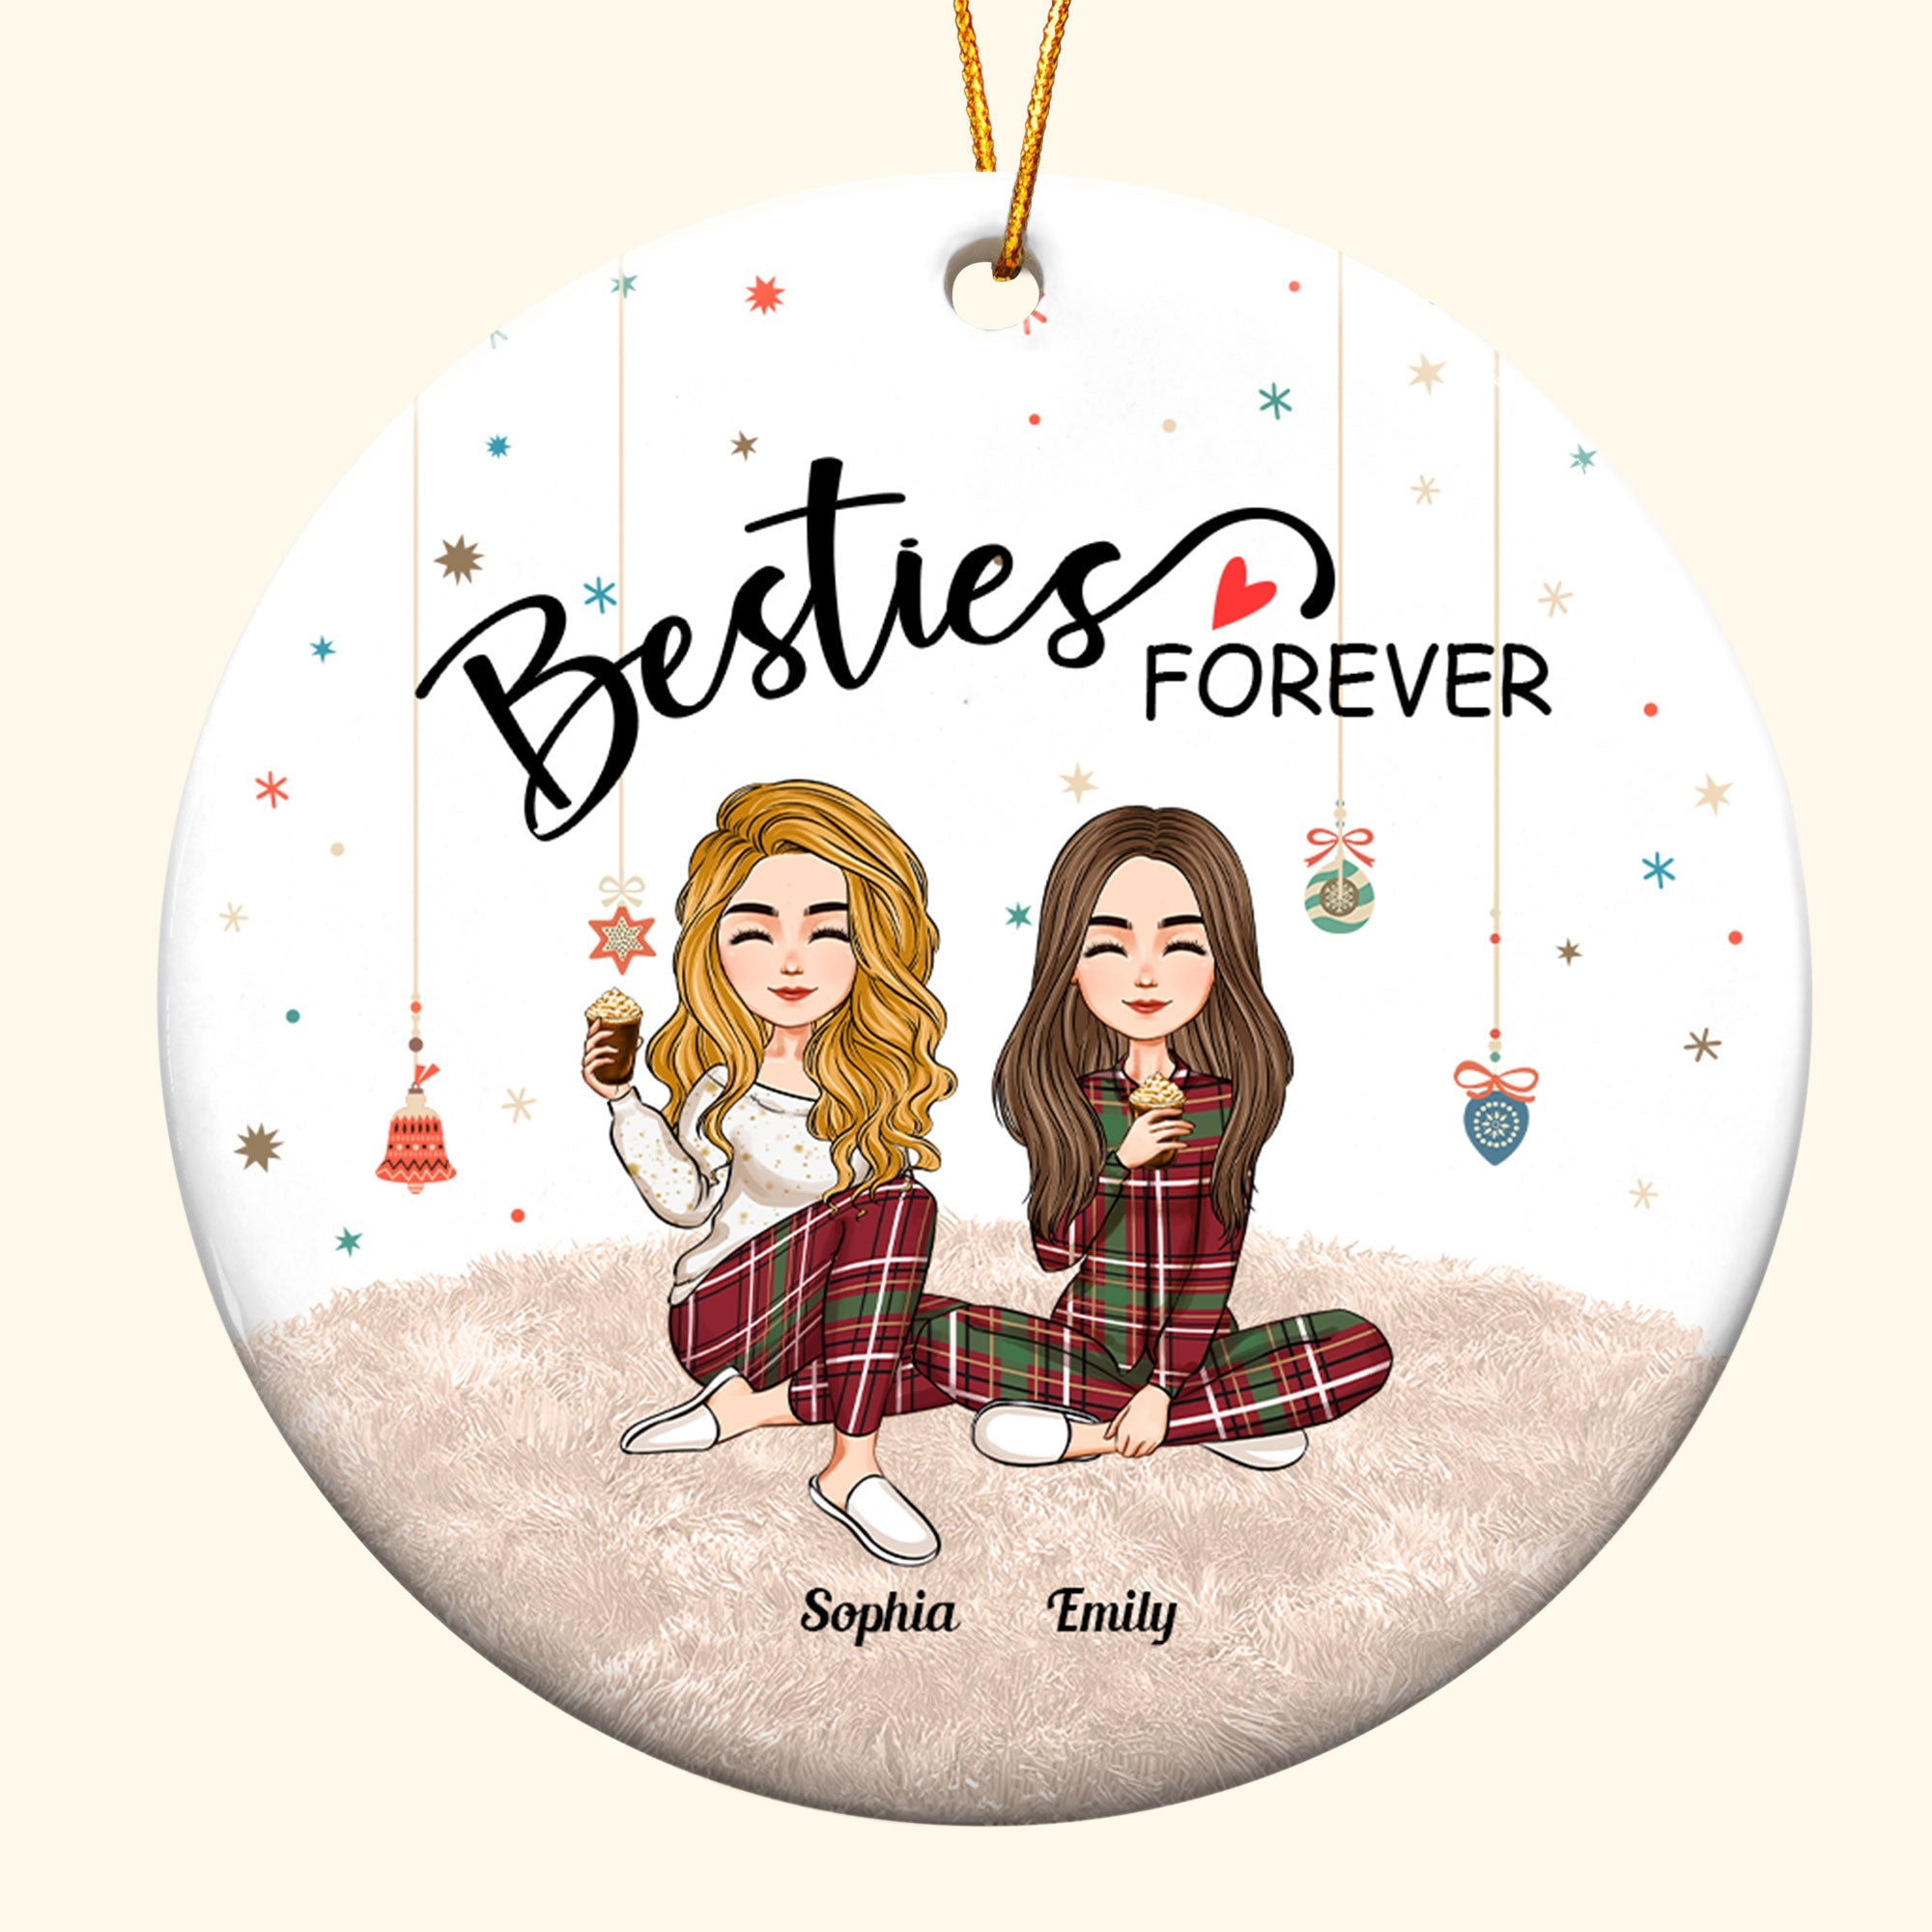 Besties Forever - Personalized Ceramic Ornament - Christmas, New Year Gift For Sistas, Sister, Besties, Best Friends, Soul Sisters